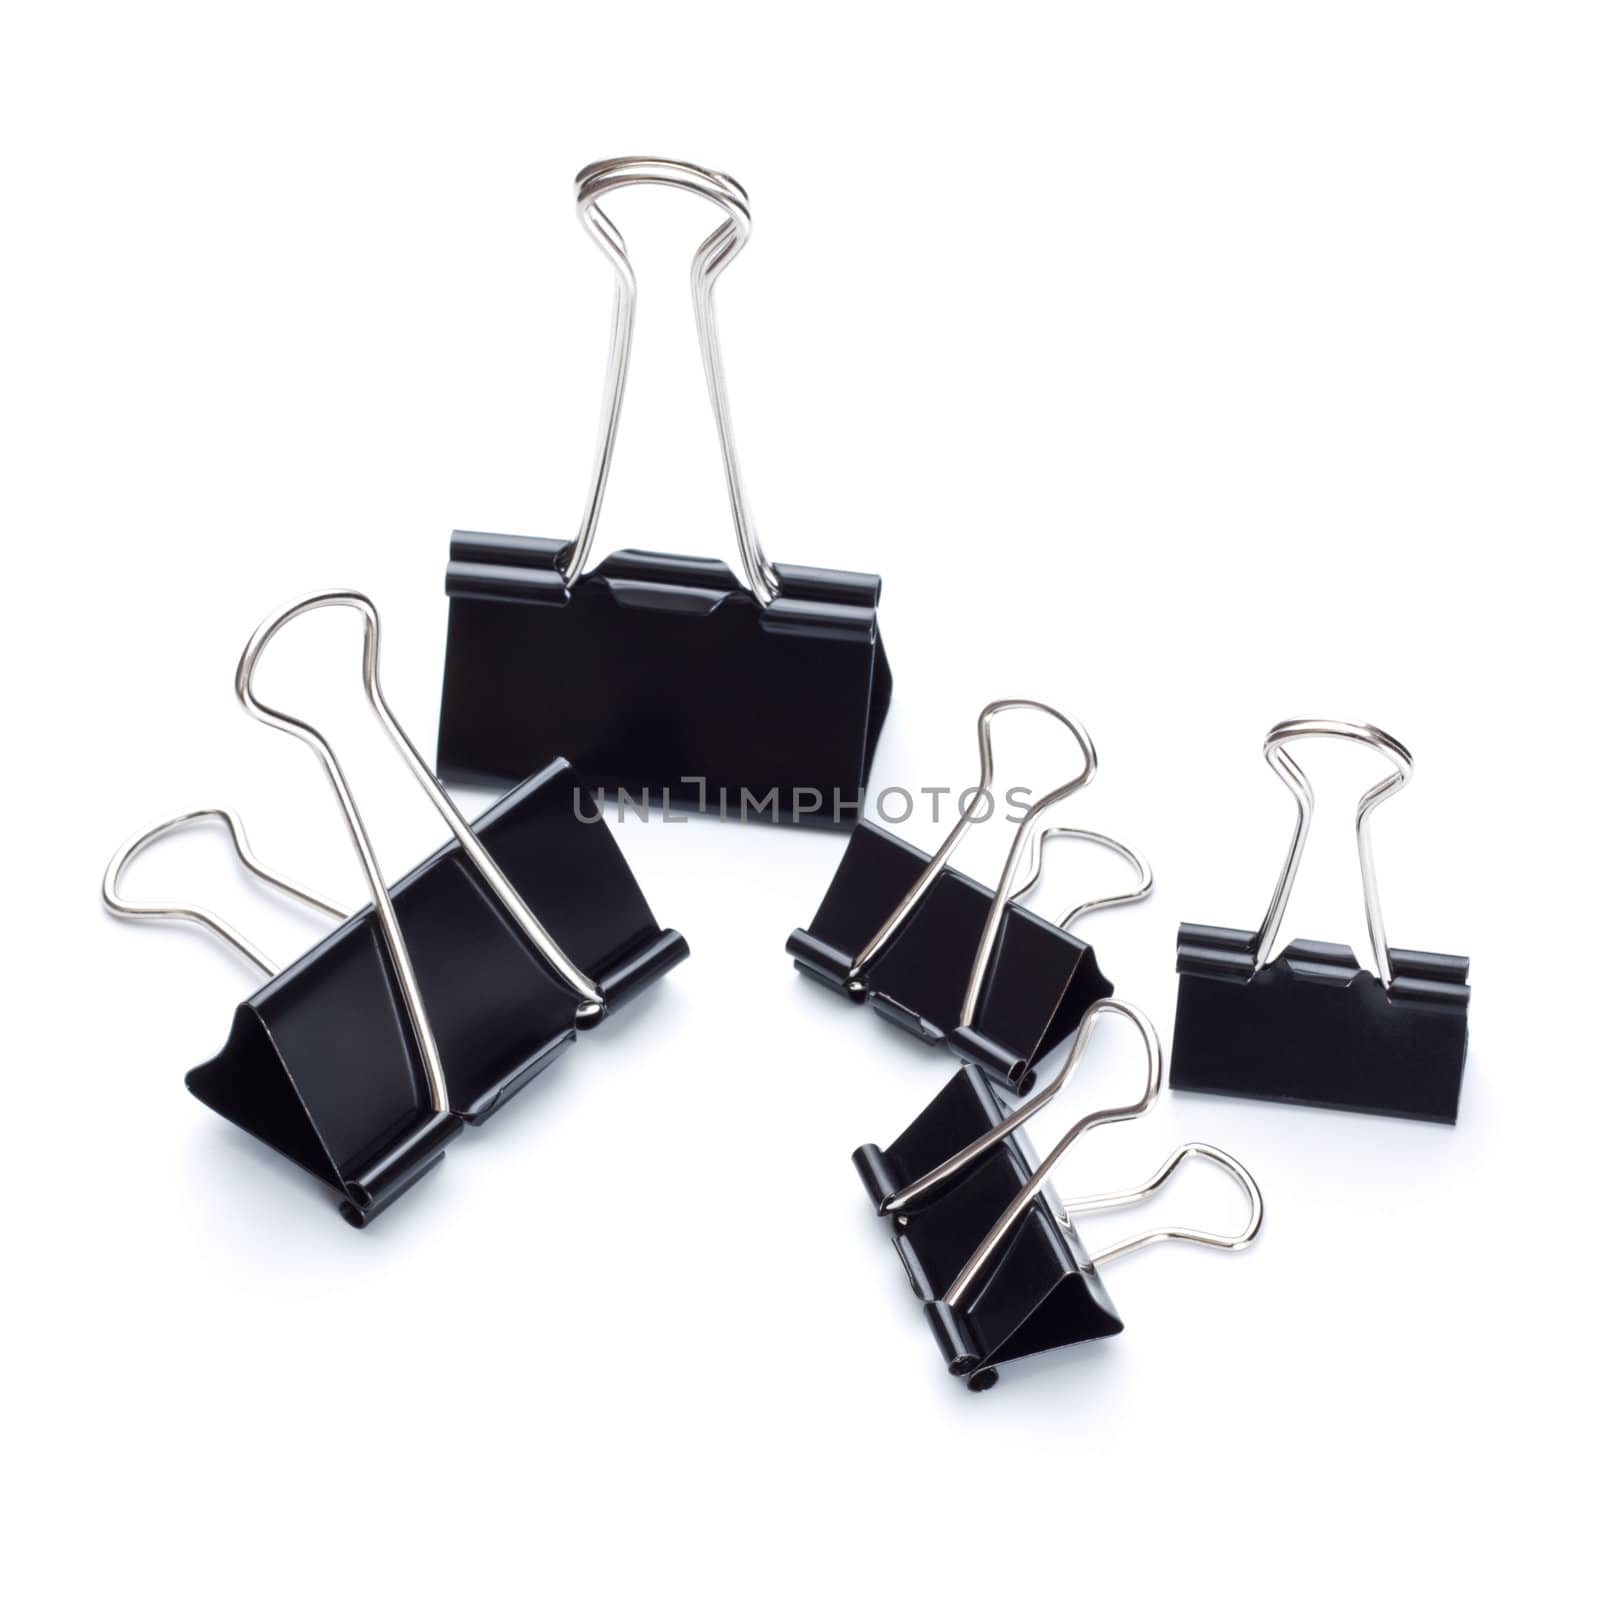 black binder clips isolated on white background